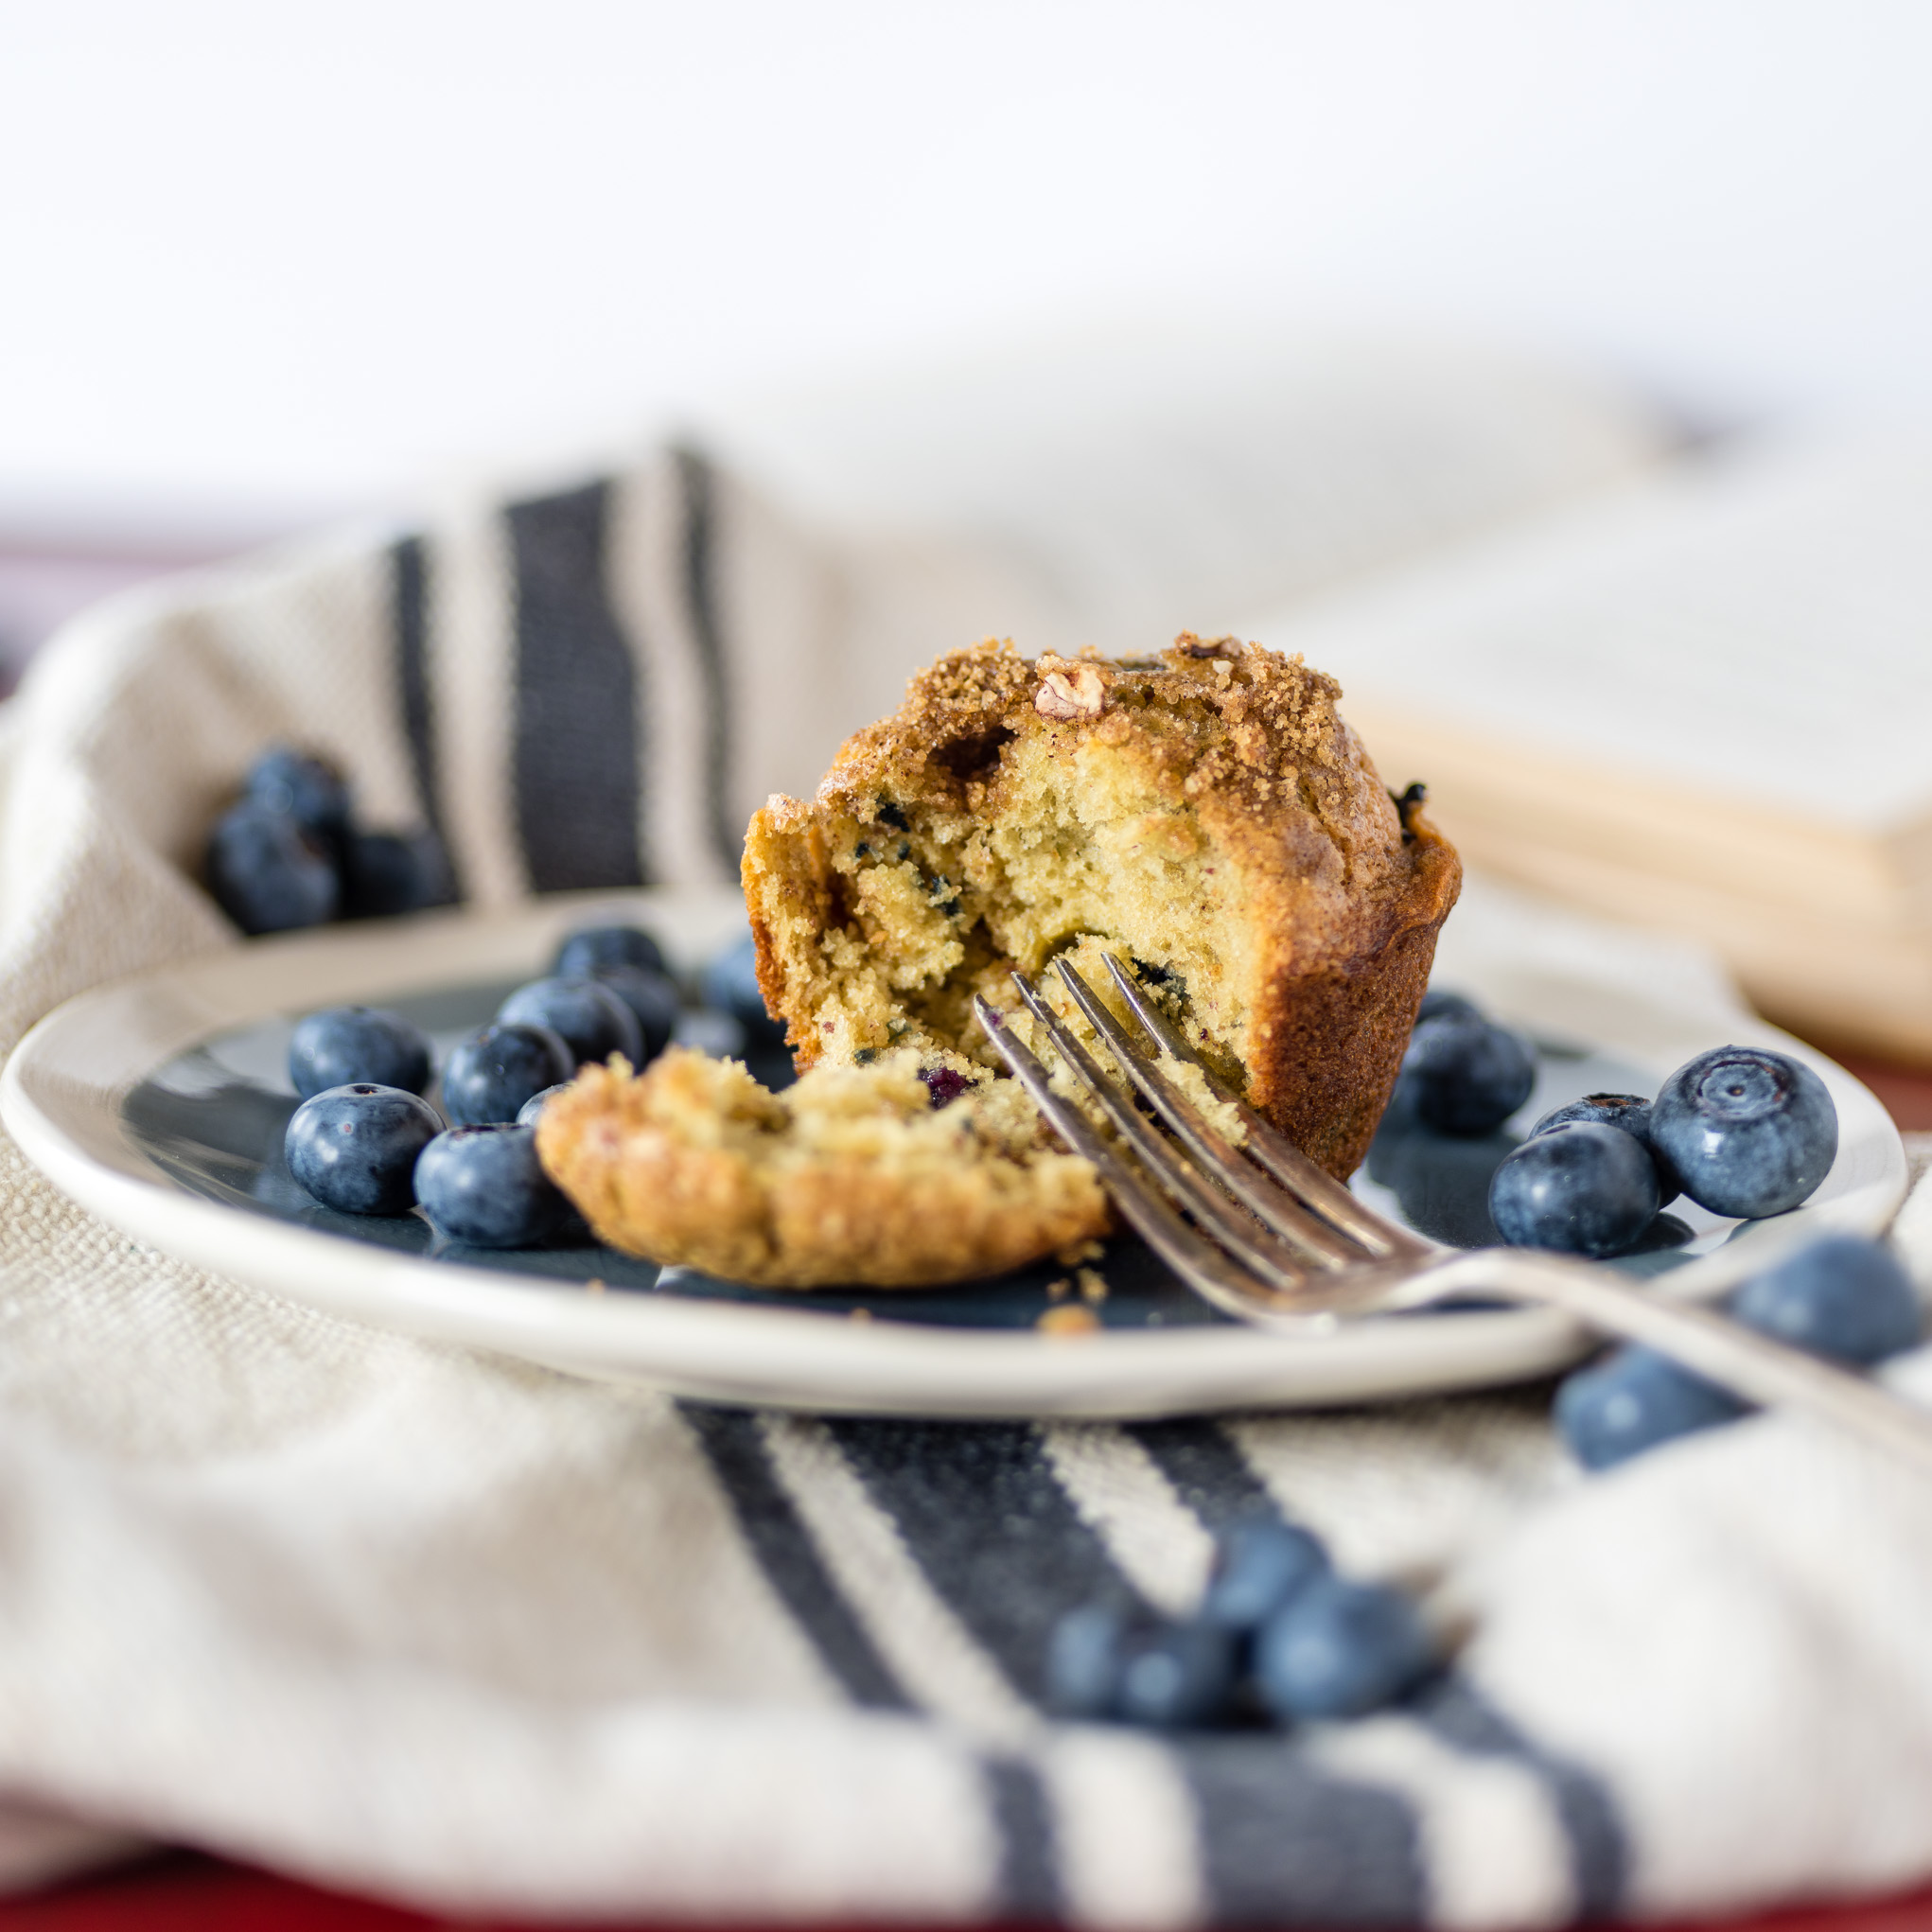 ### Unlock the Secrets of Irresistible Homemade Blueberry Bliss Muffins